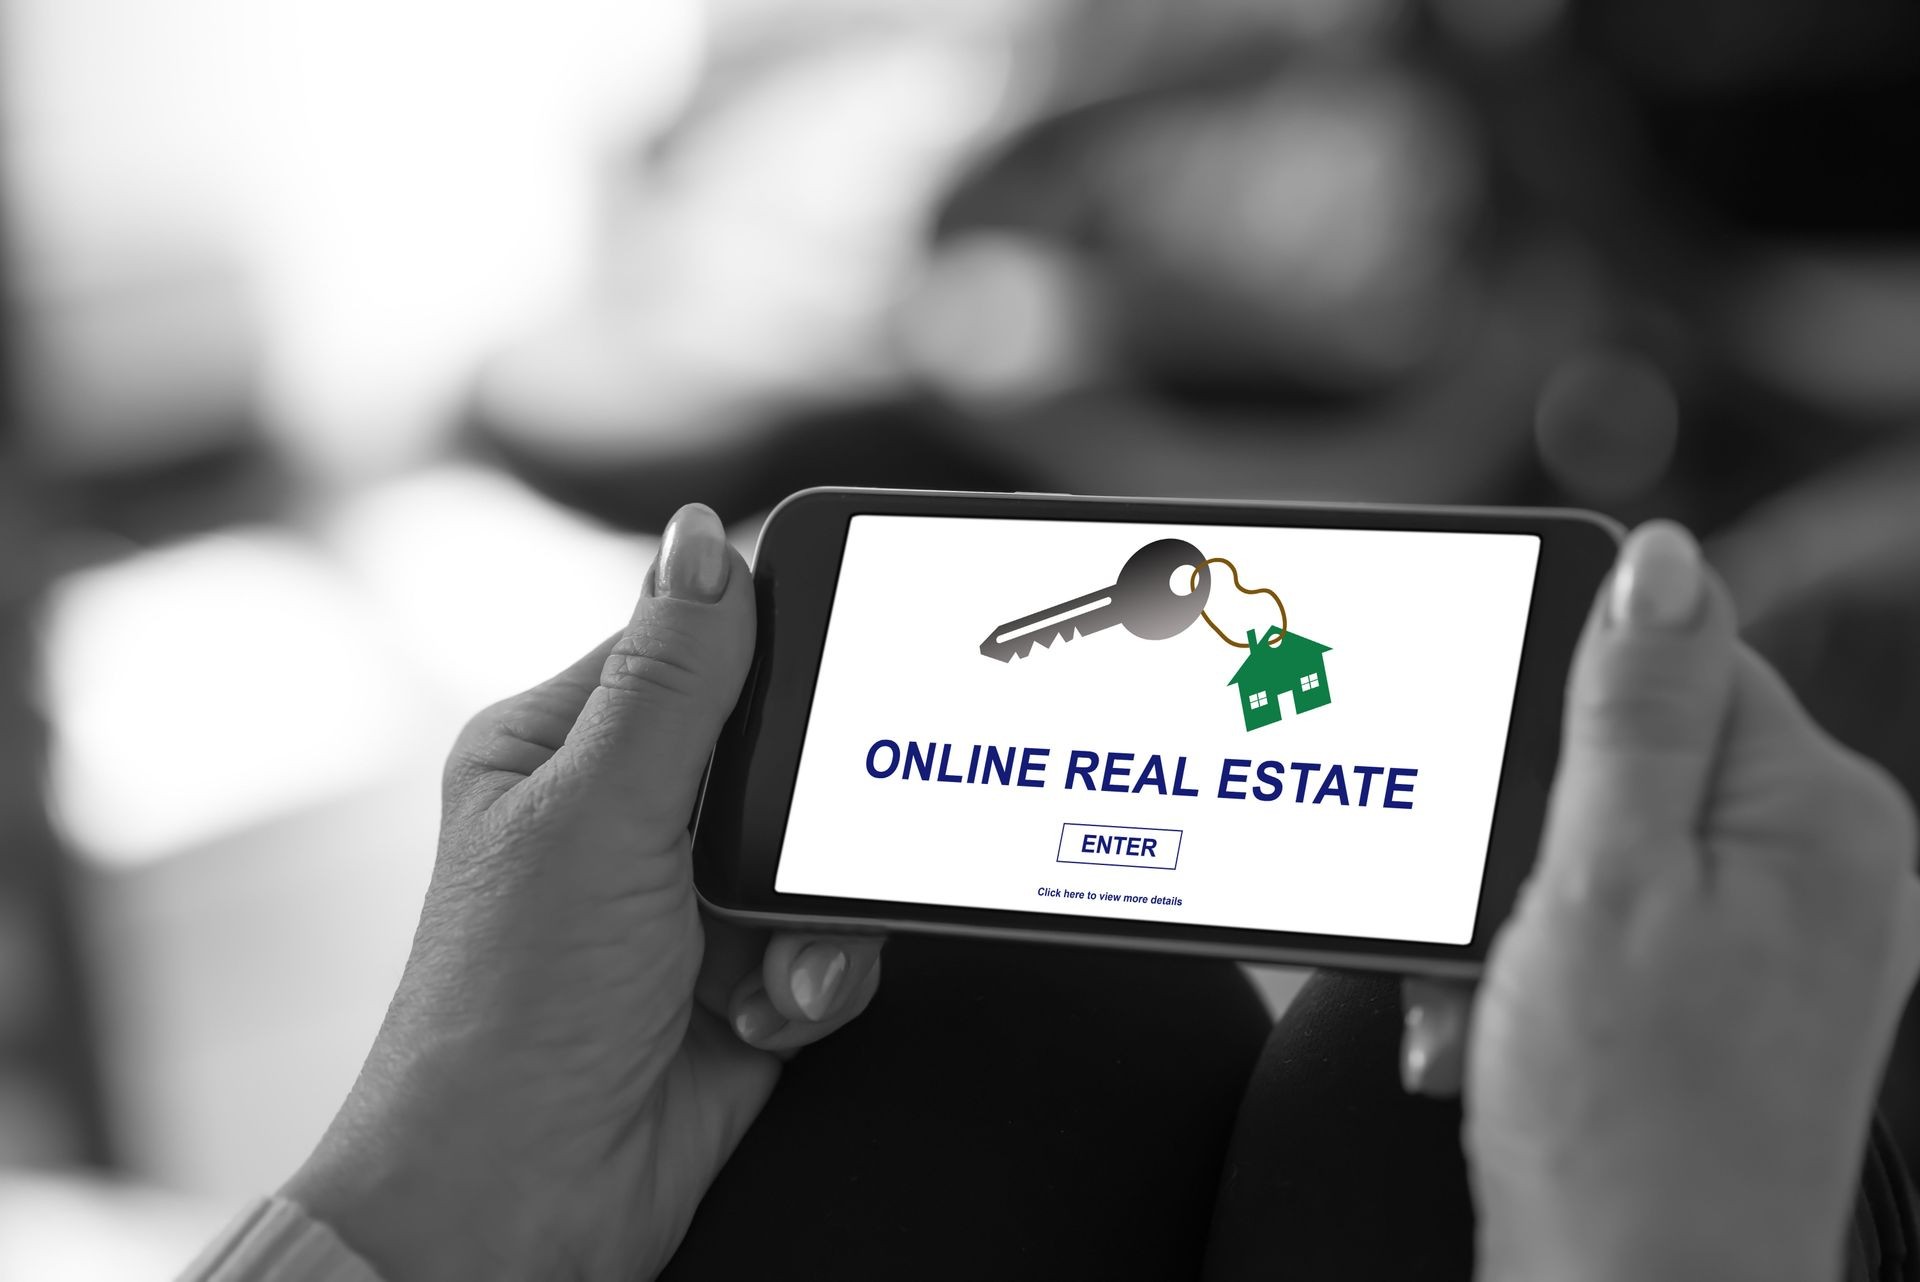 Smartphone screen displaying an online real estate concept